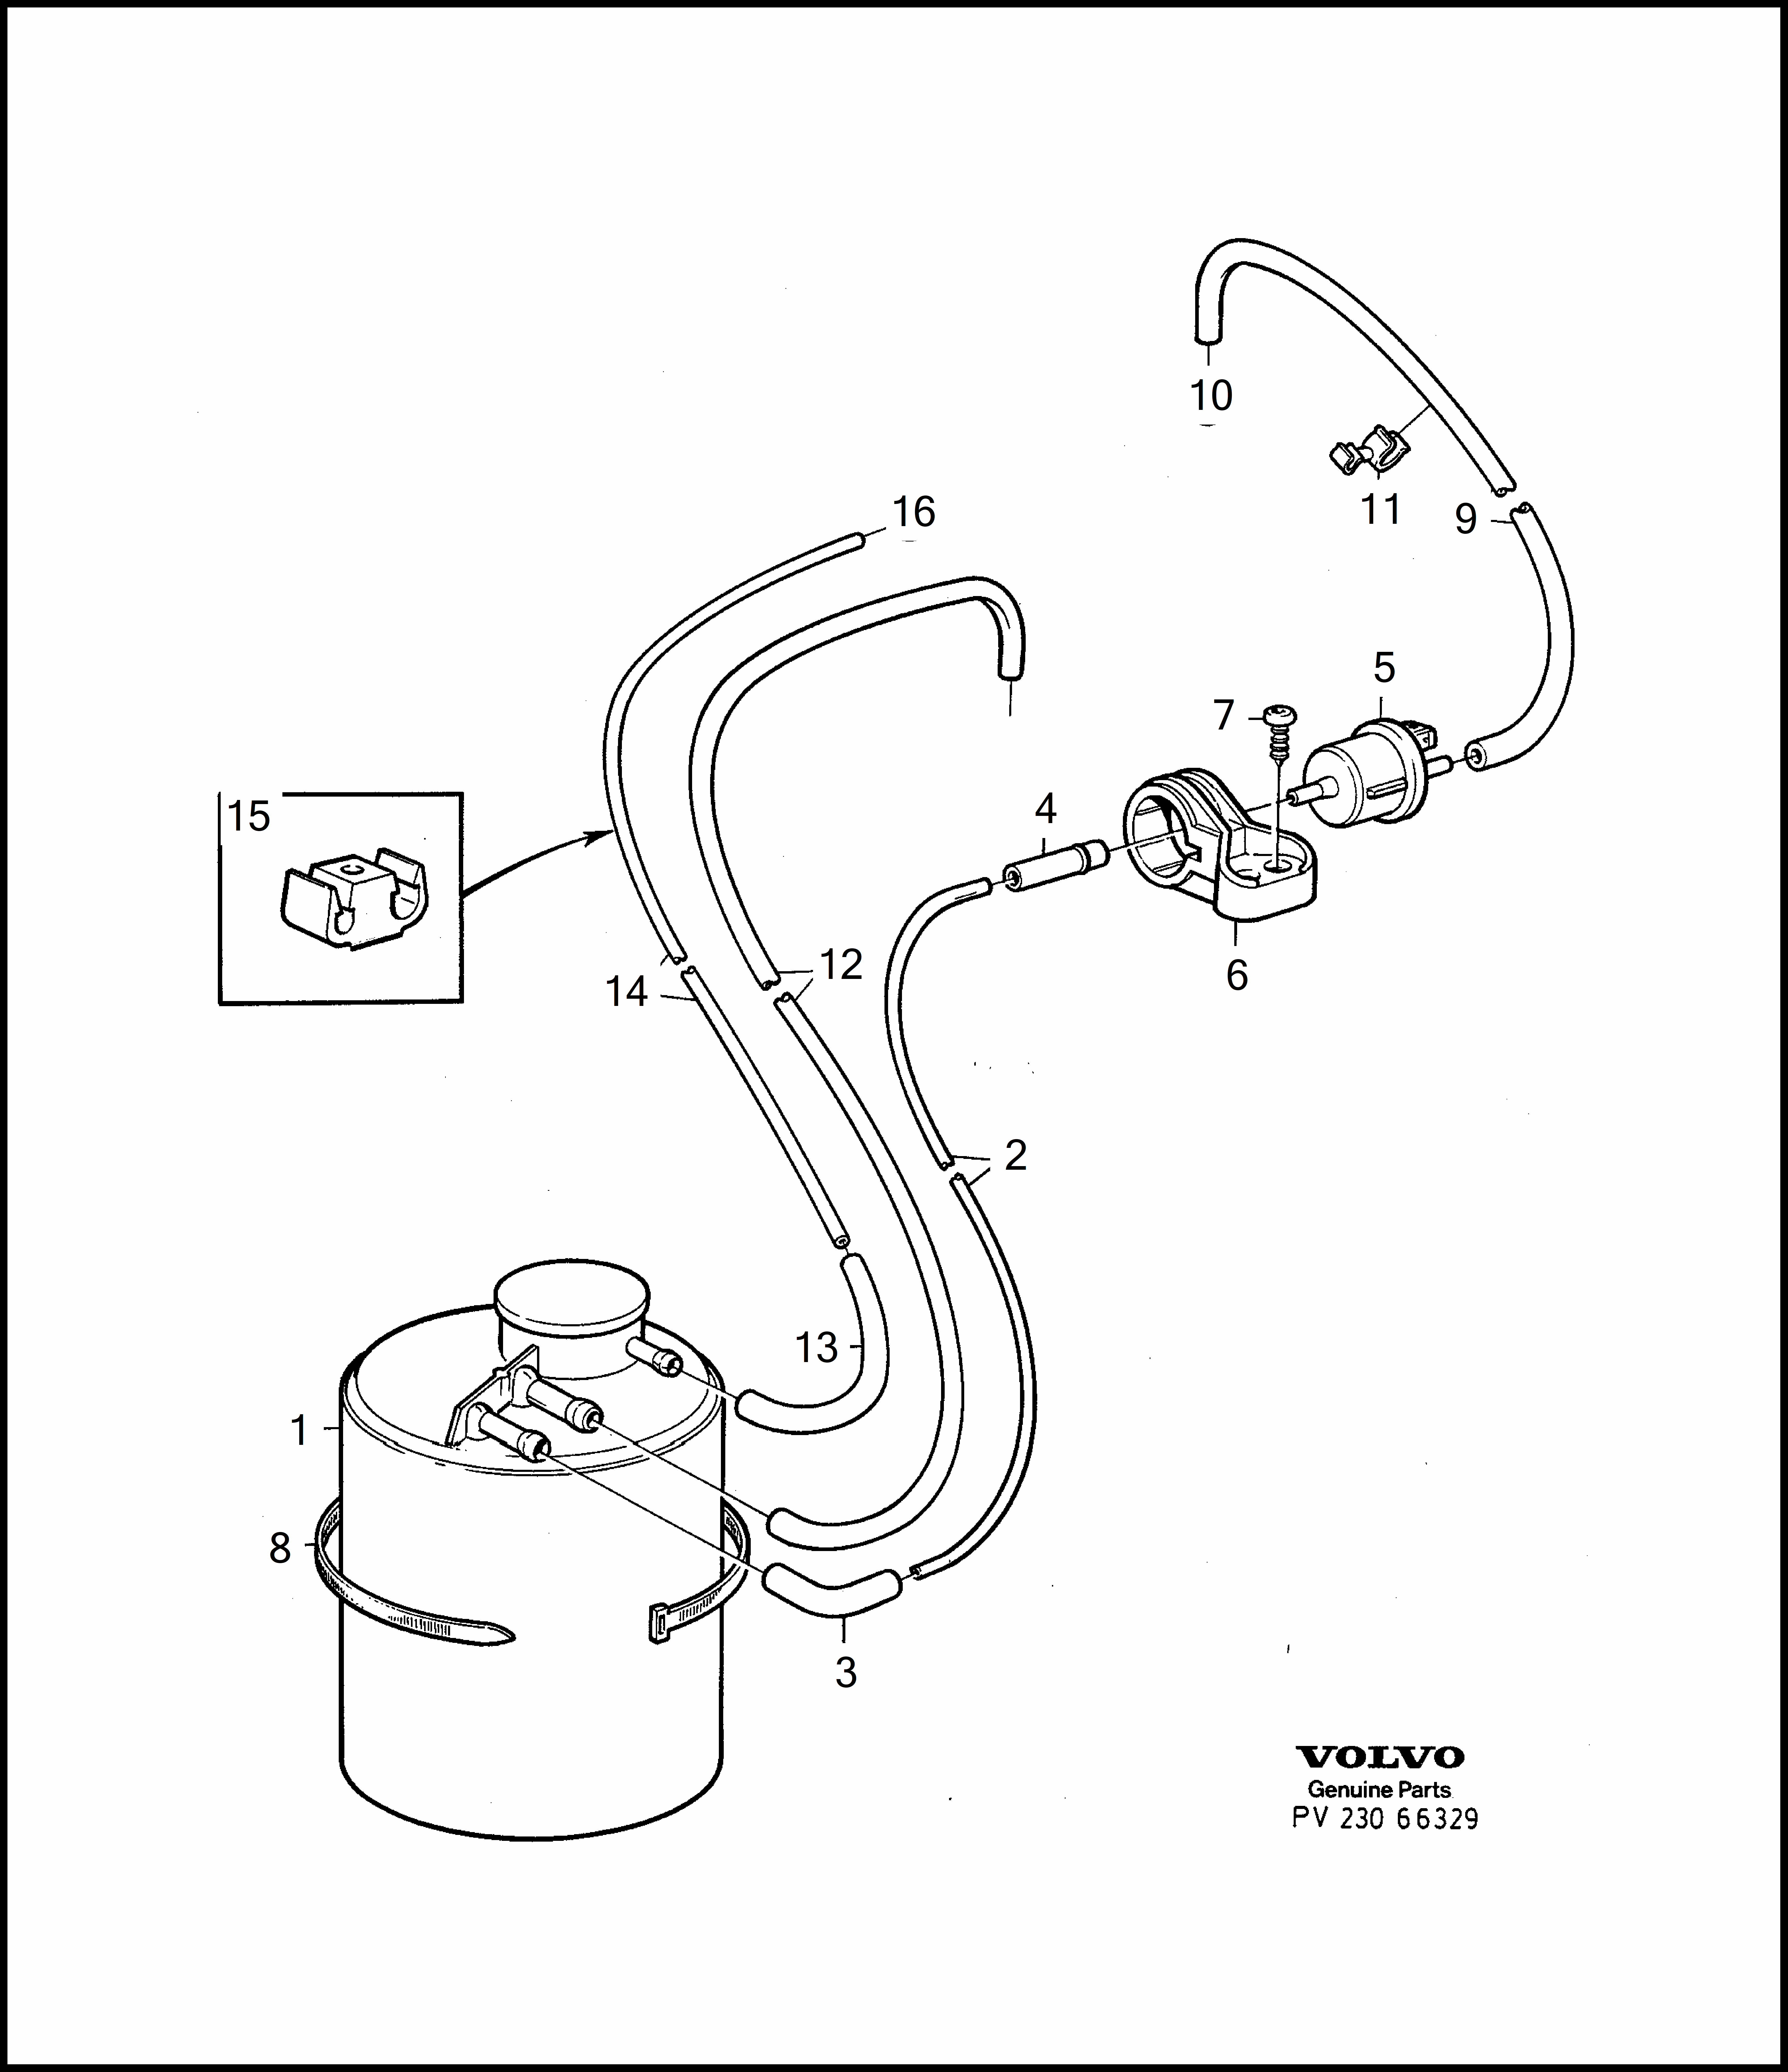 carbon filter with fittings per Volvo 960 960